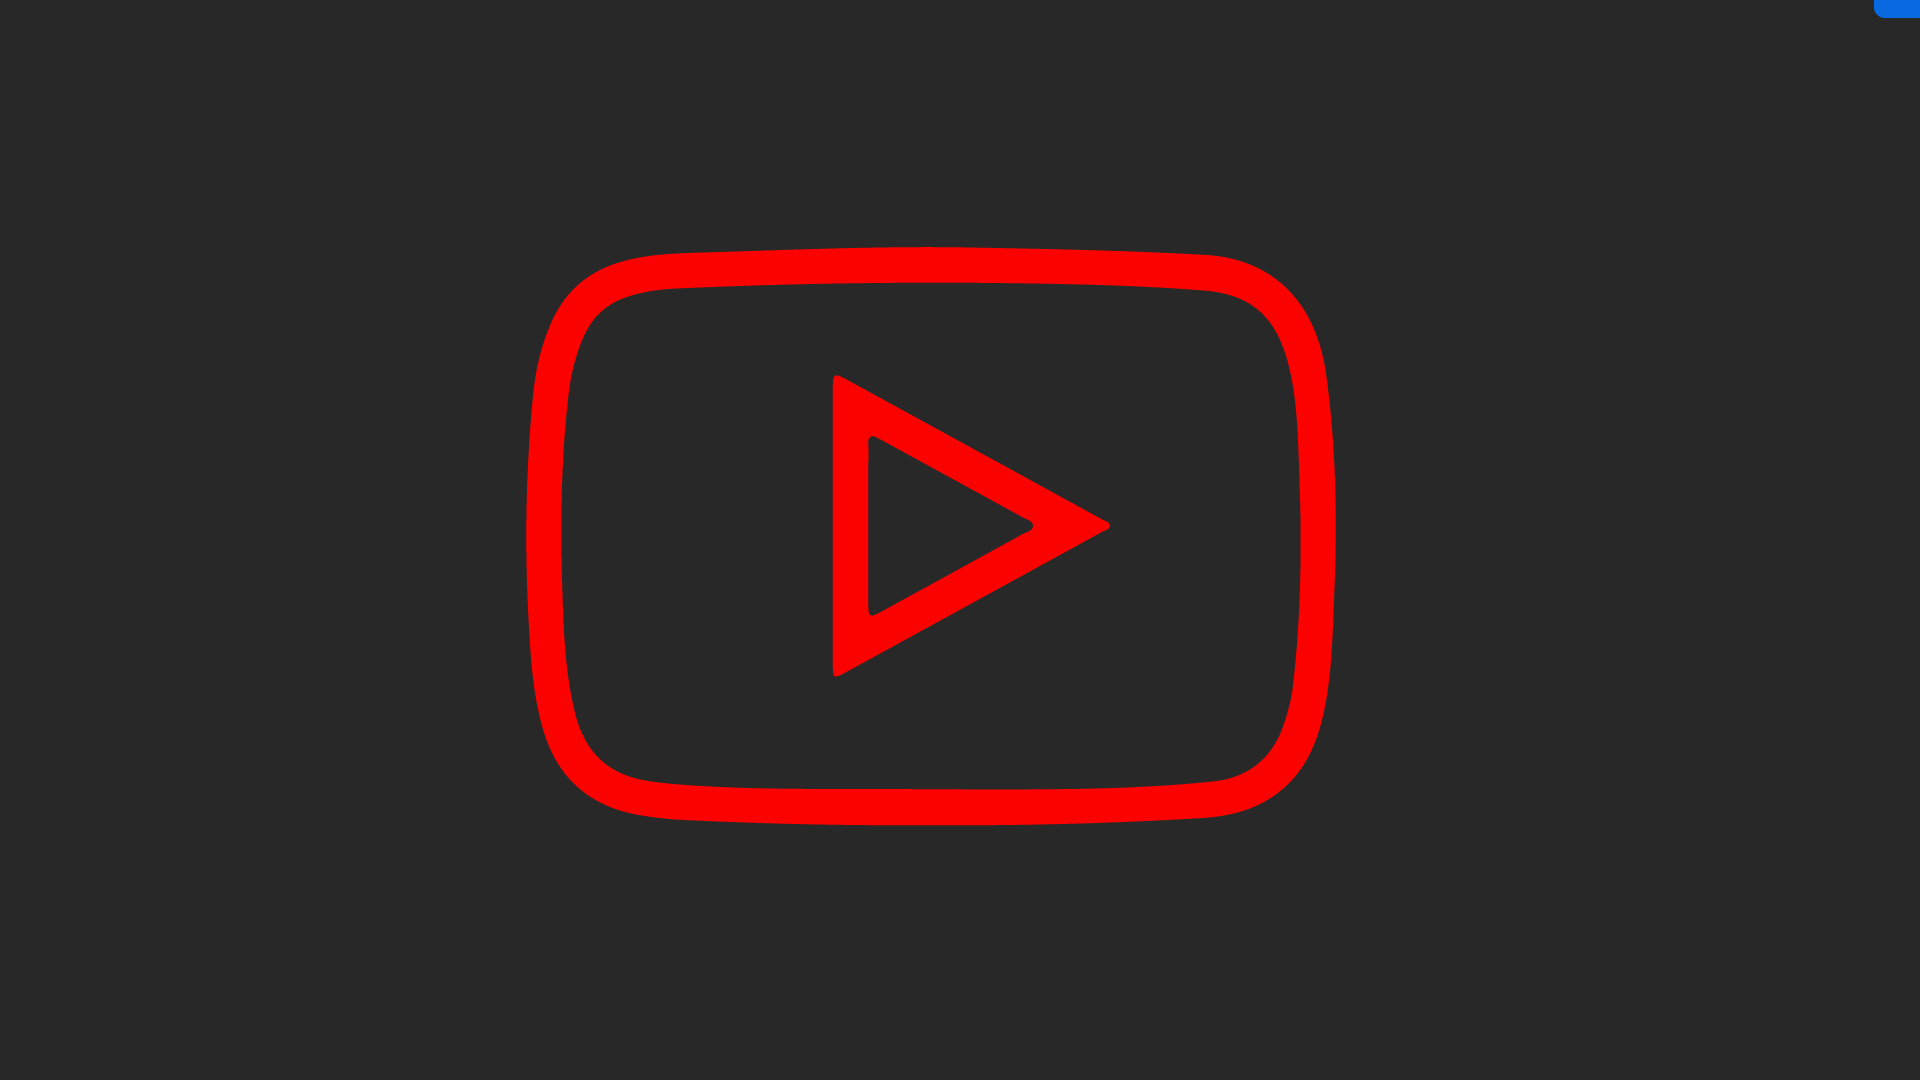 YouTube's New Line Art Icons Are Rolling Out On Android